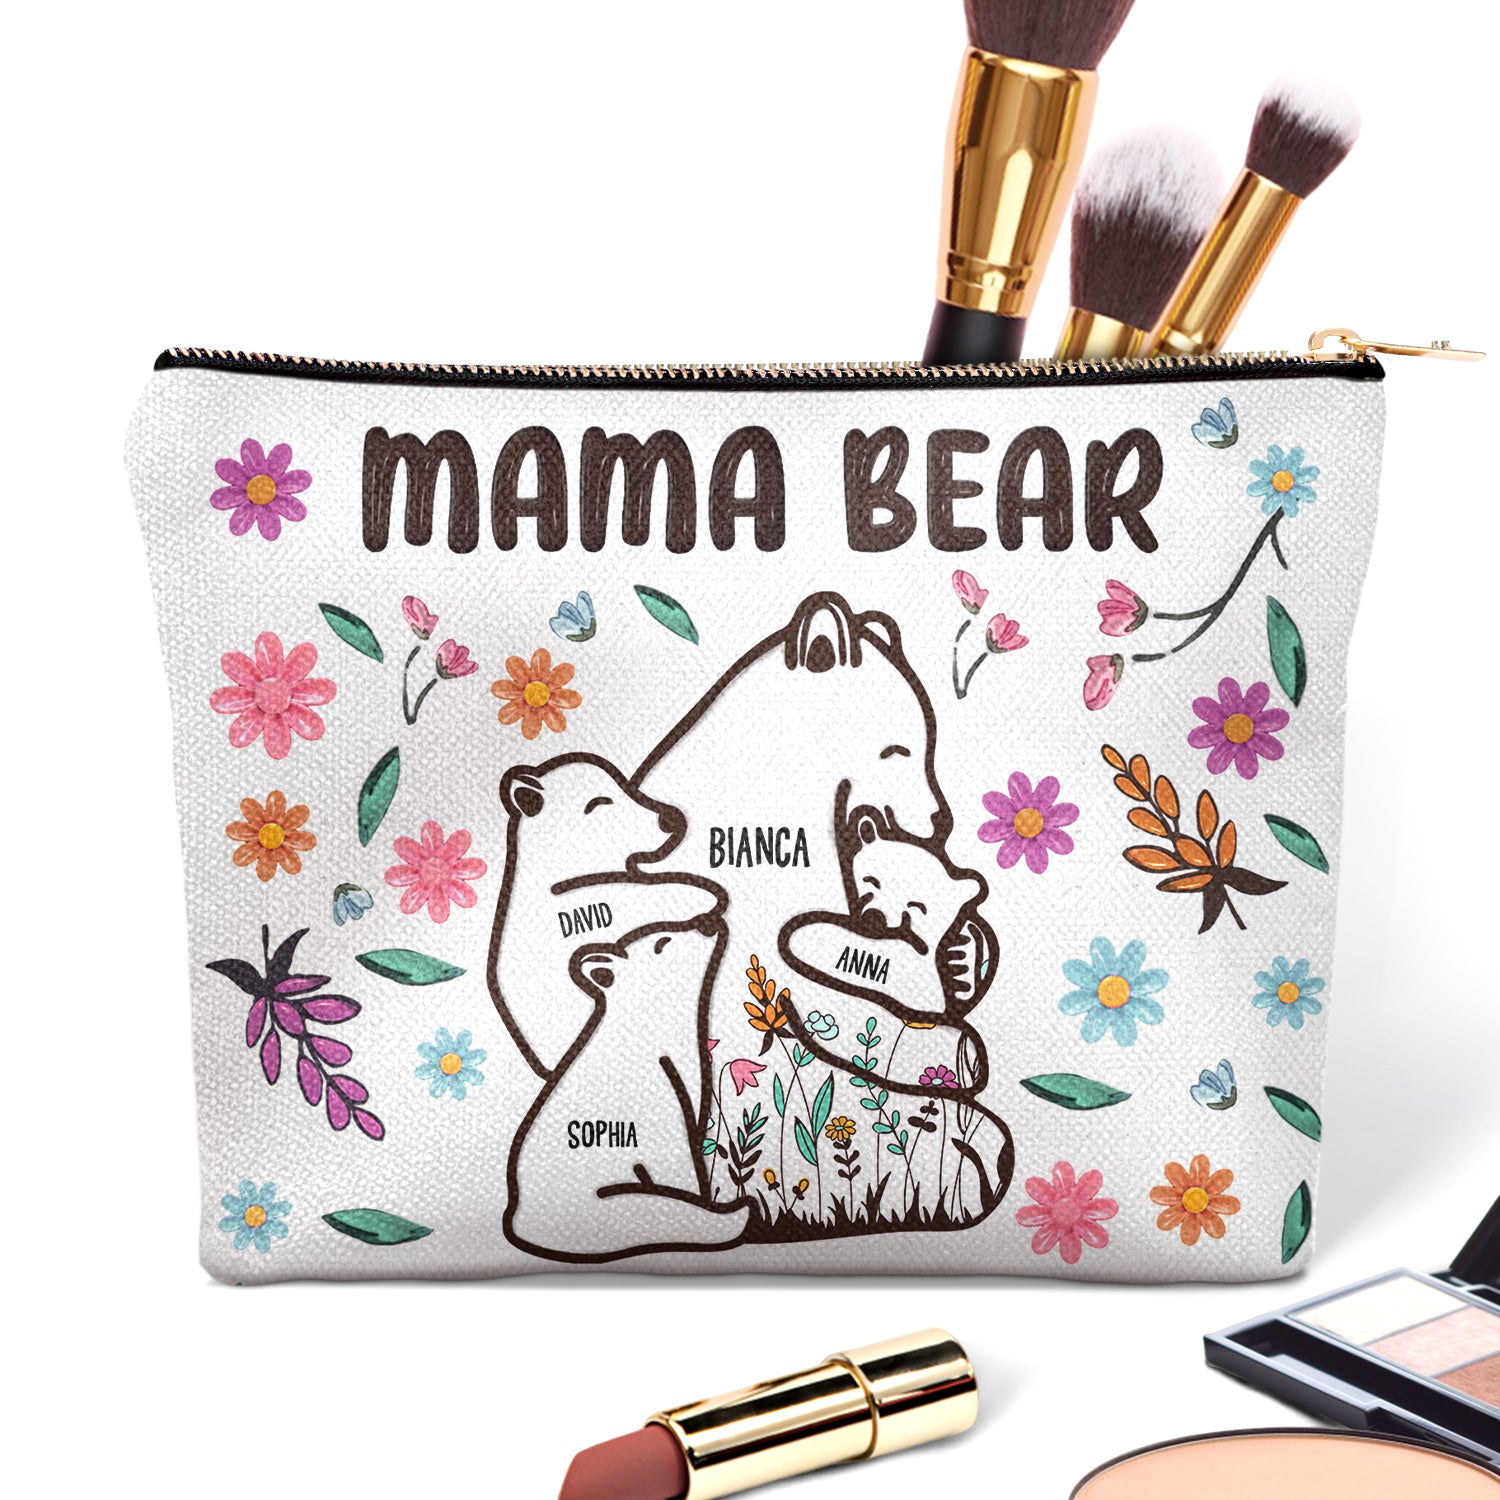 Mama Bear Floral Style - Birthday, Loving Gift For Mom, Mother, Grandma, Grandmother - Personalized Cosmetic Bag